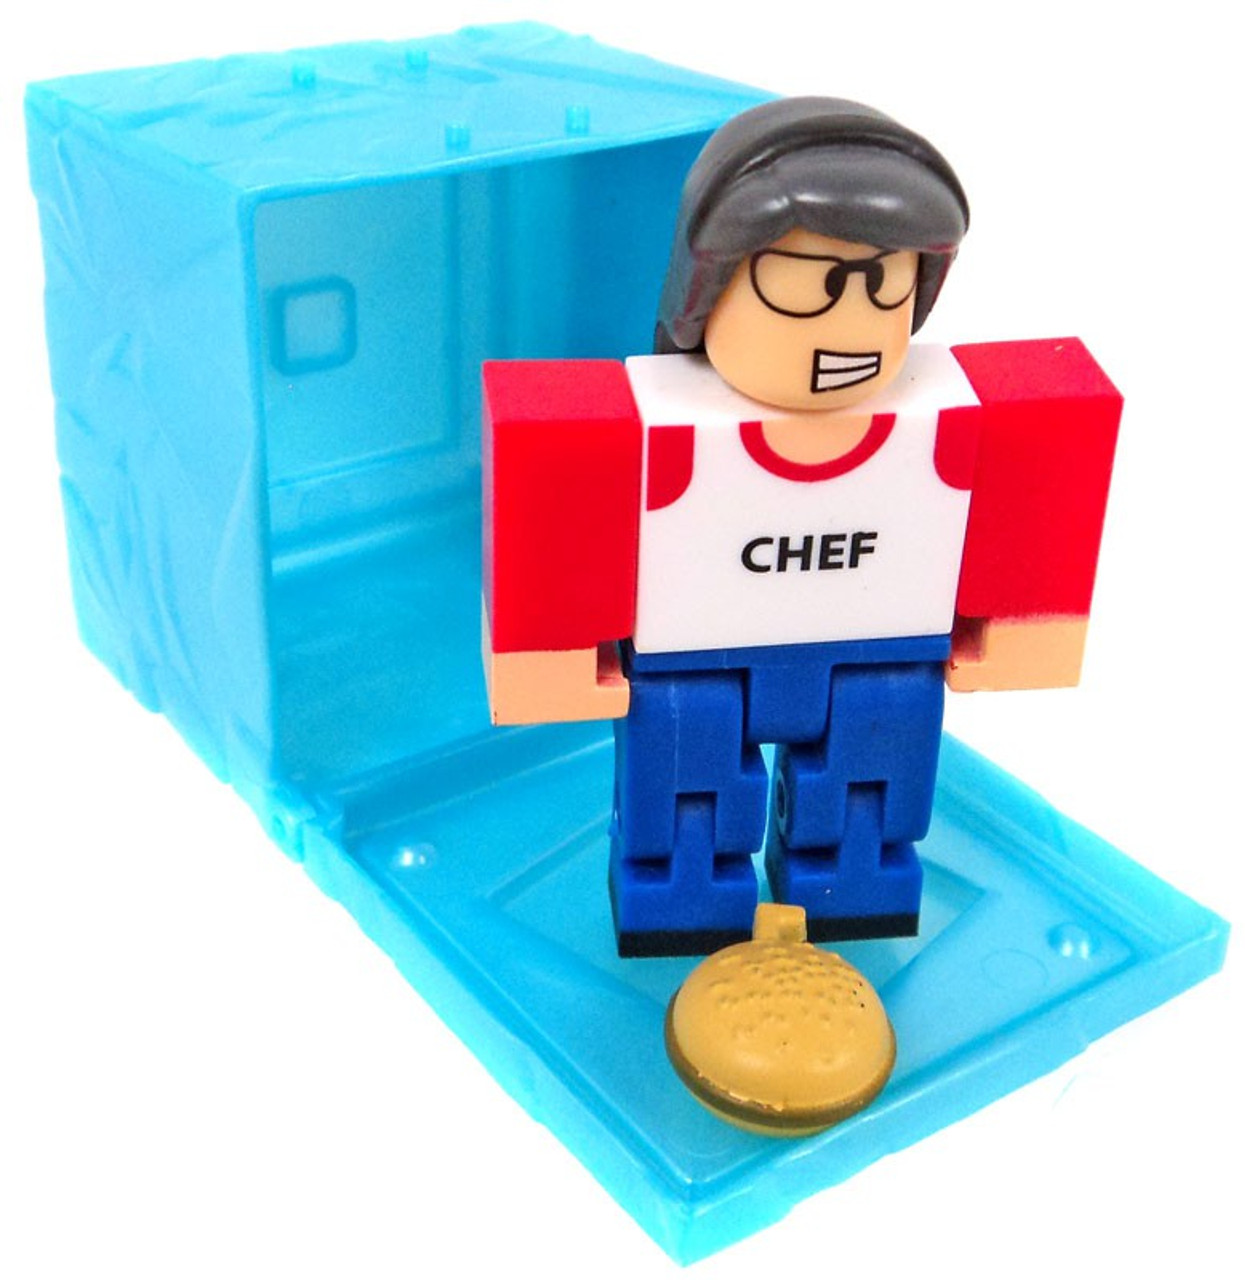 Roblox Red Series 3 High School Life Lunch Lady 3 Mini Figure Blue Cube With Online Code Loose Jazwares Toywiz - high school life 2 roblox promo codes